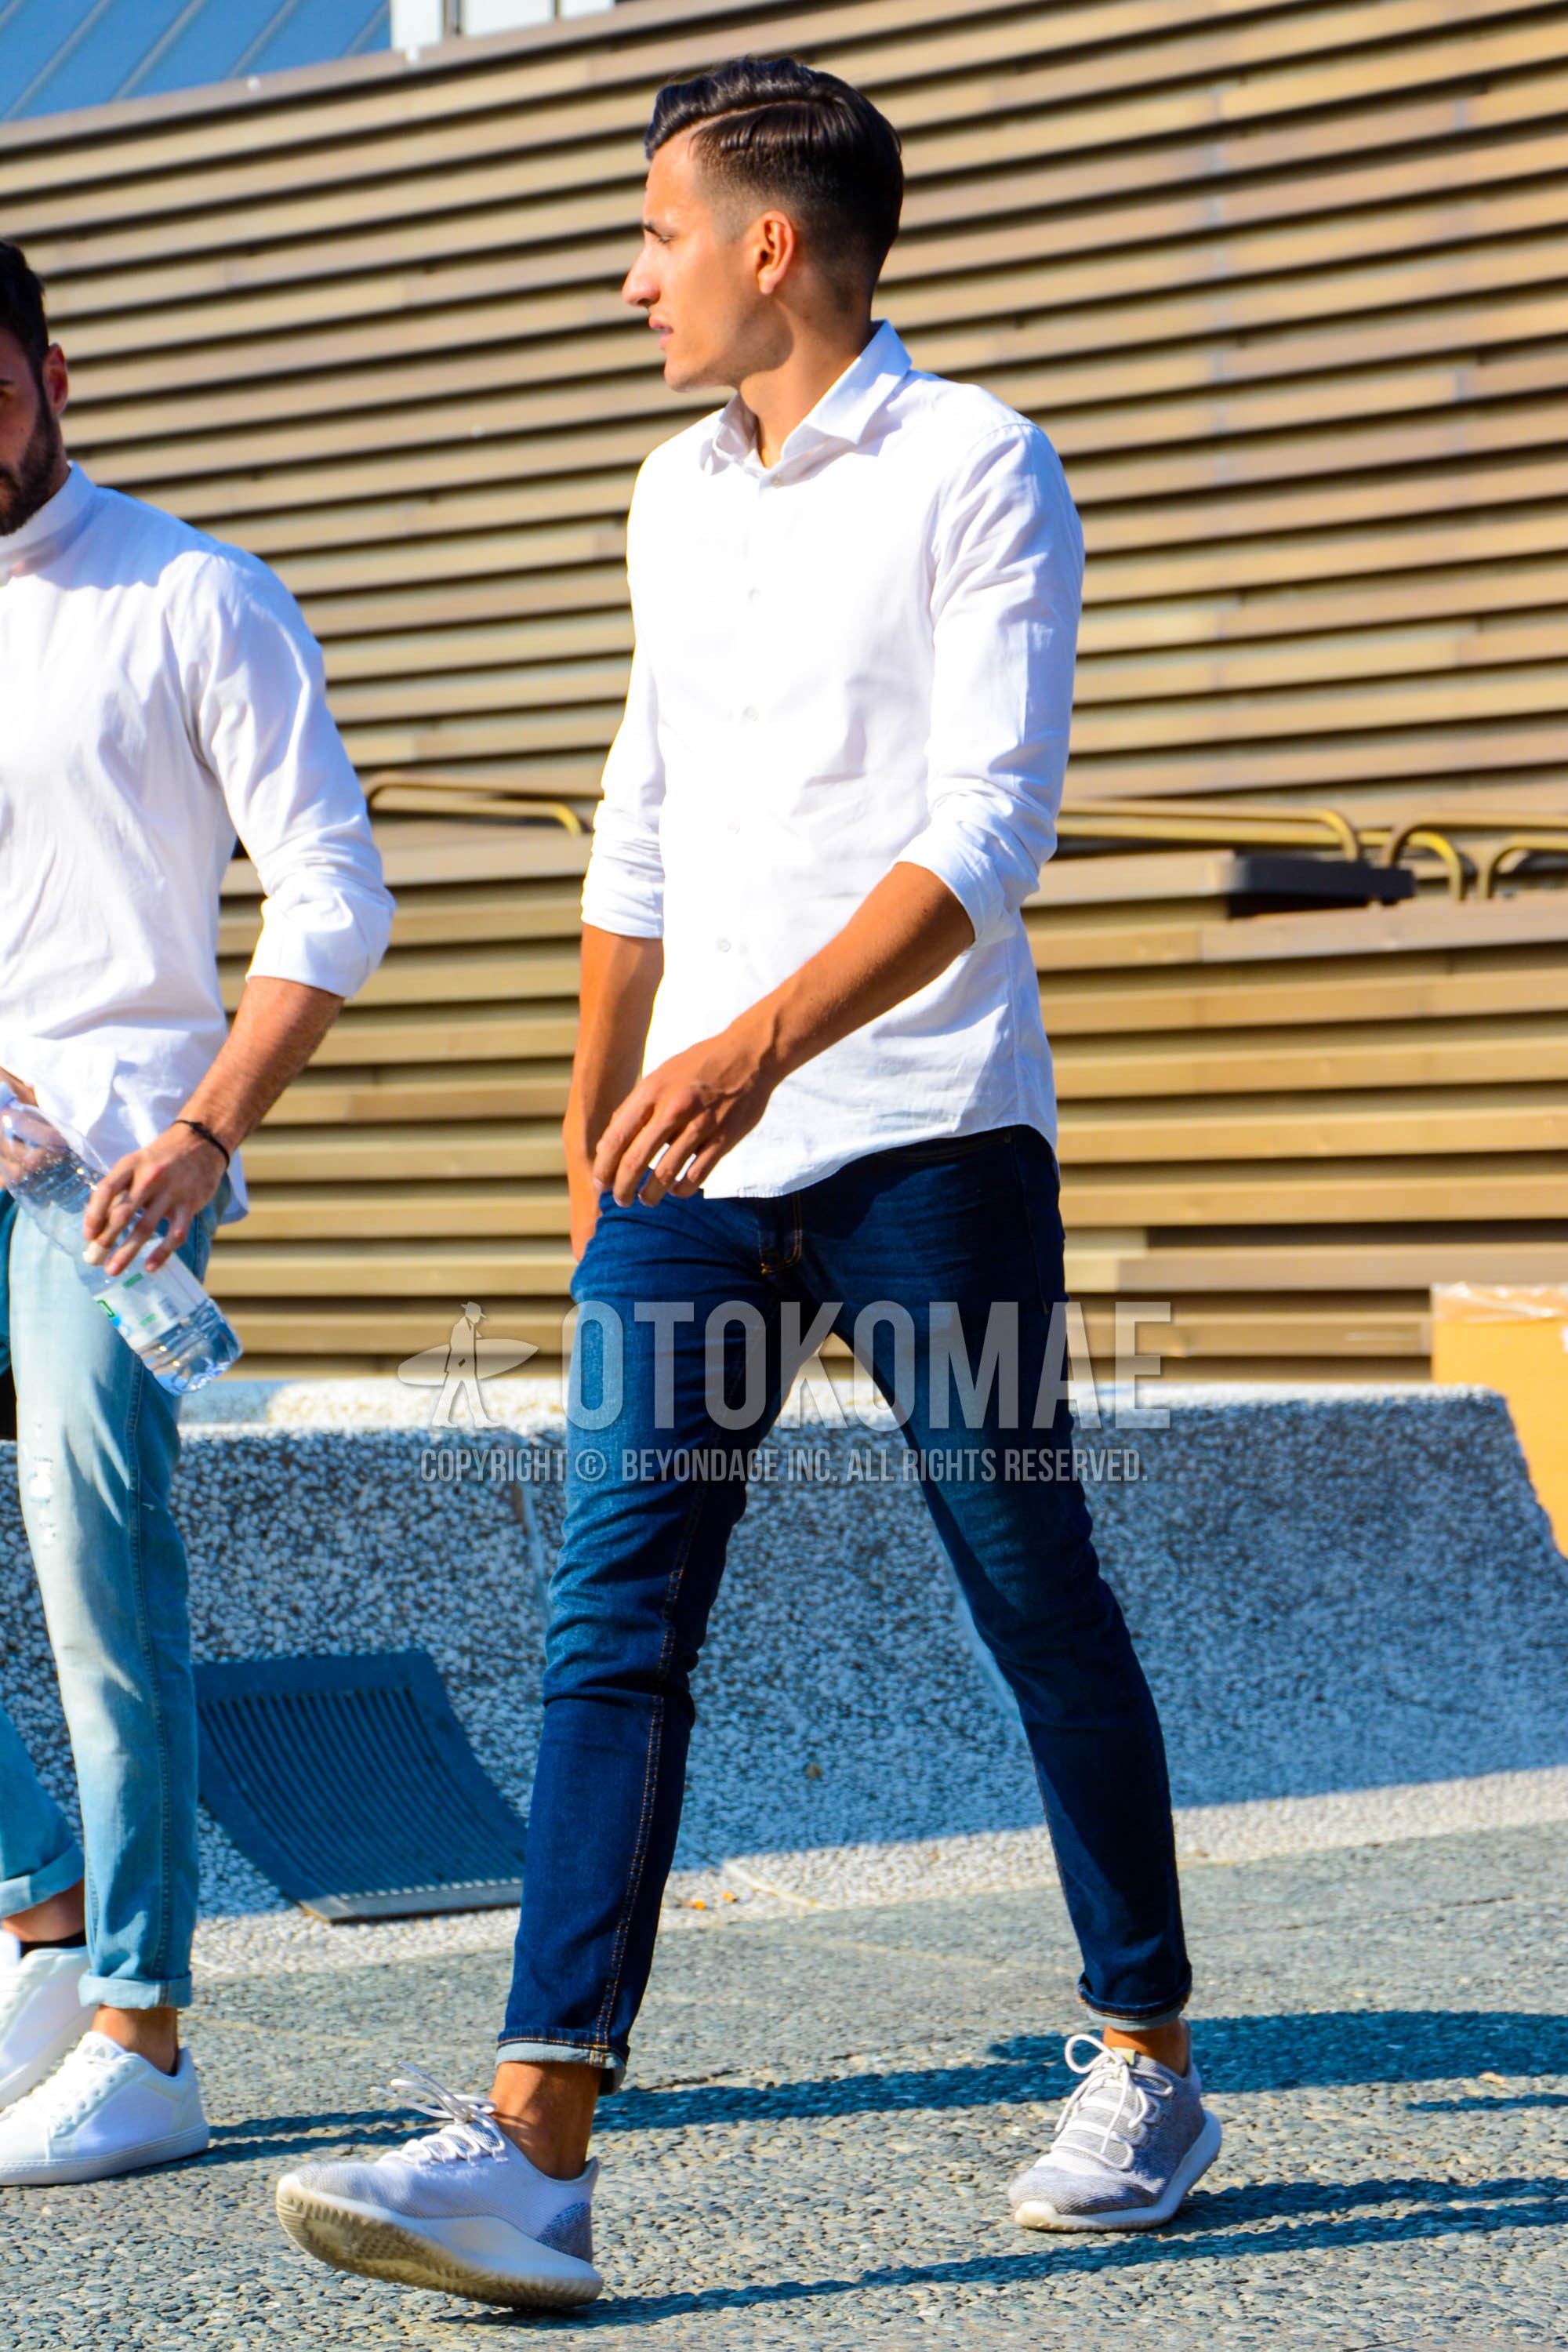 Men's spring summer outfit with white plain shirt, blue plain denim/jeans, white low-cut sneakers.